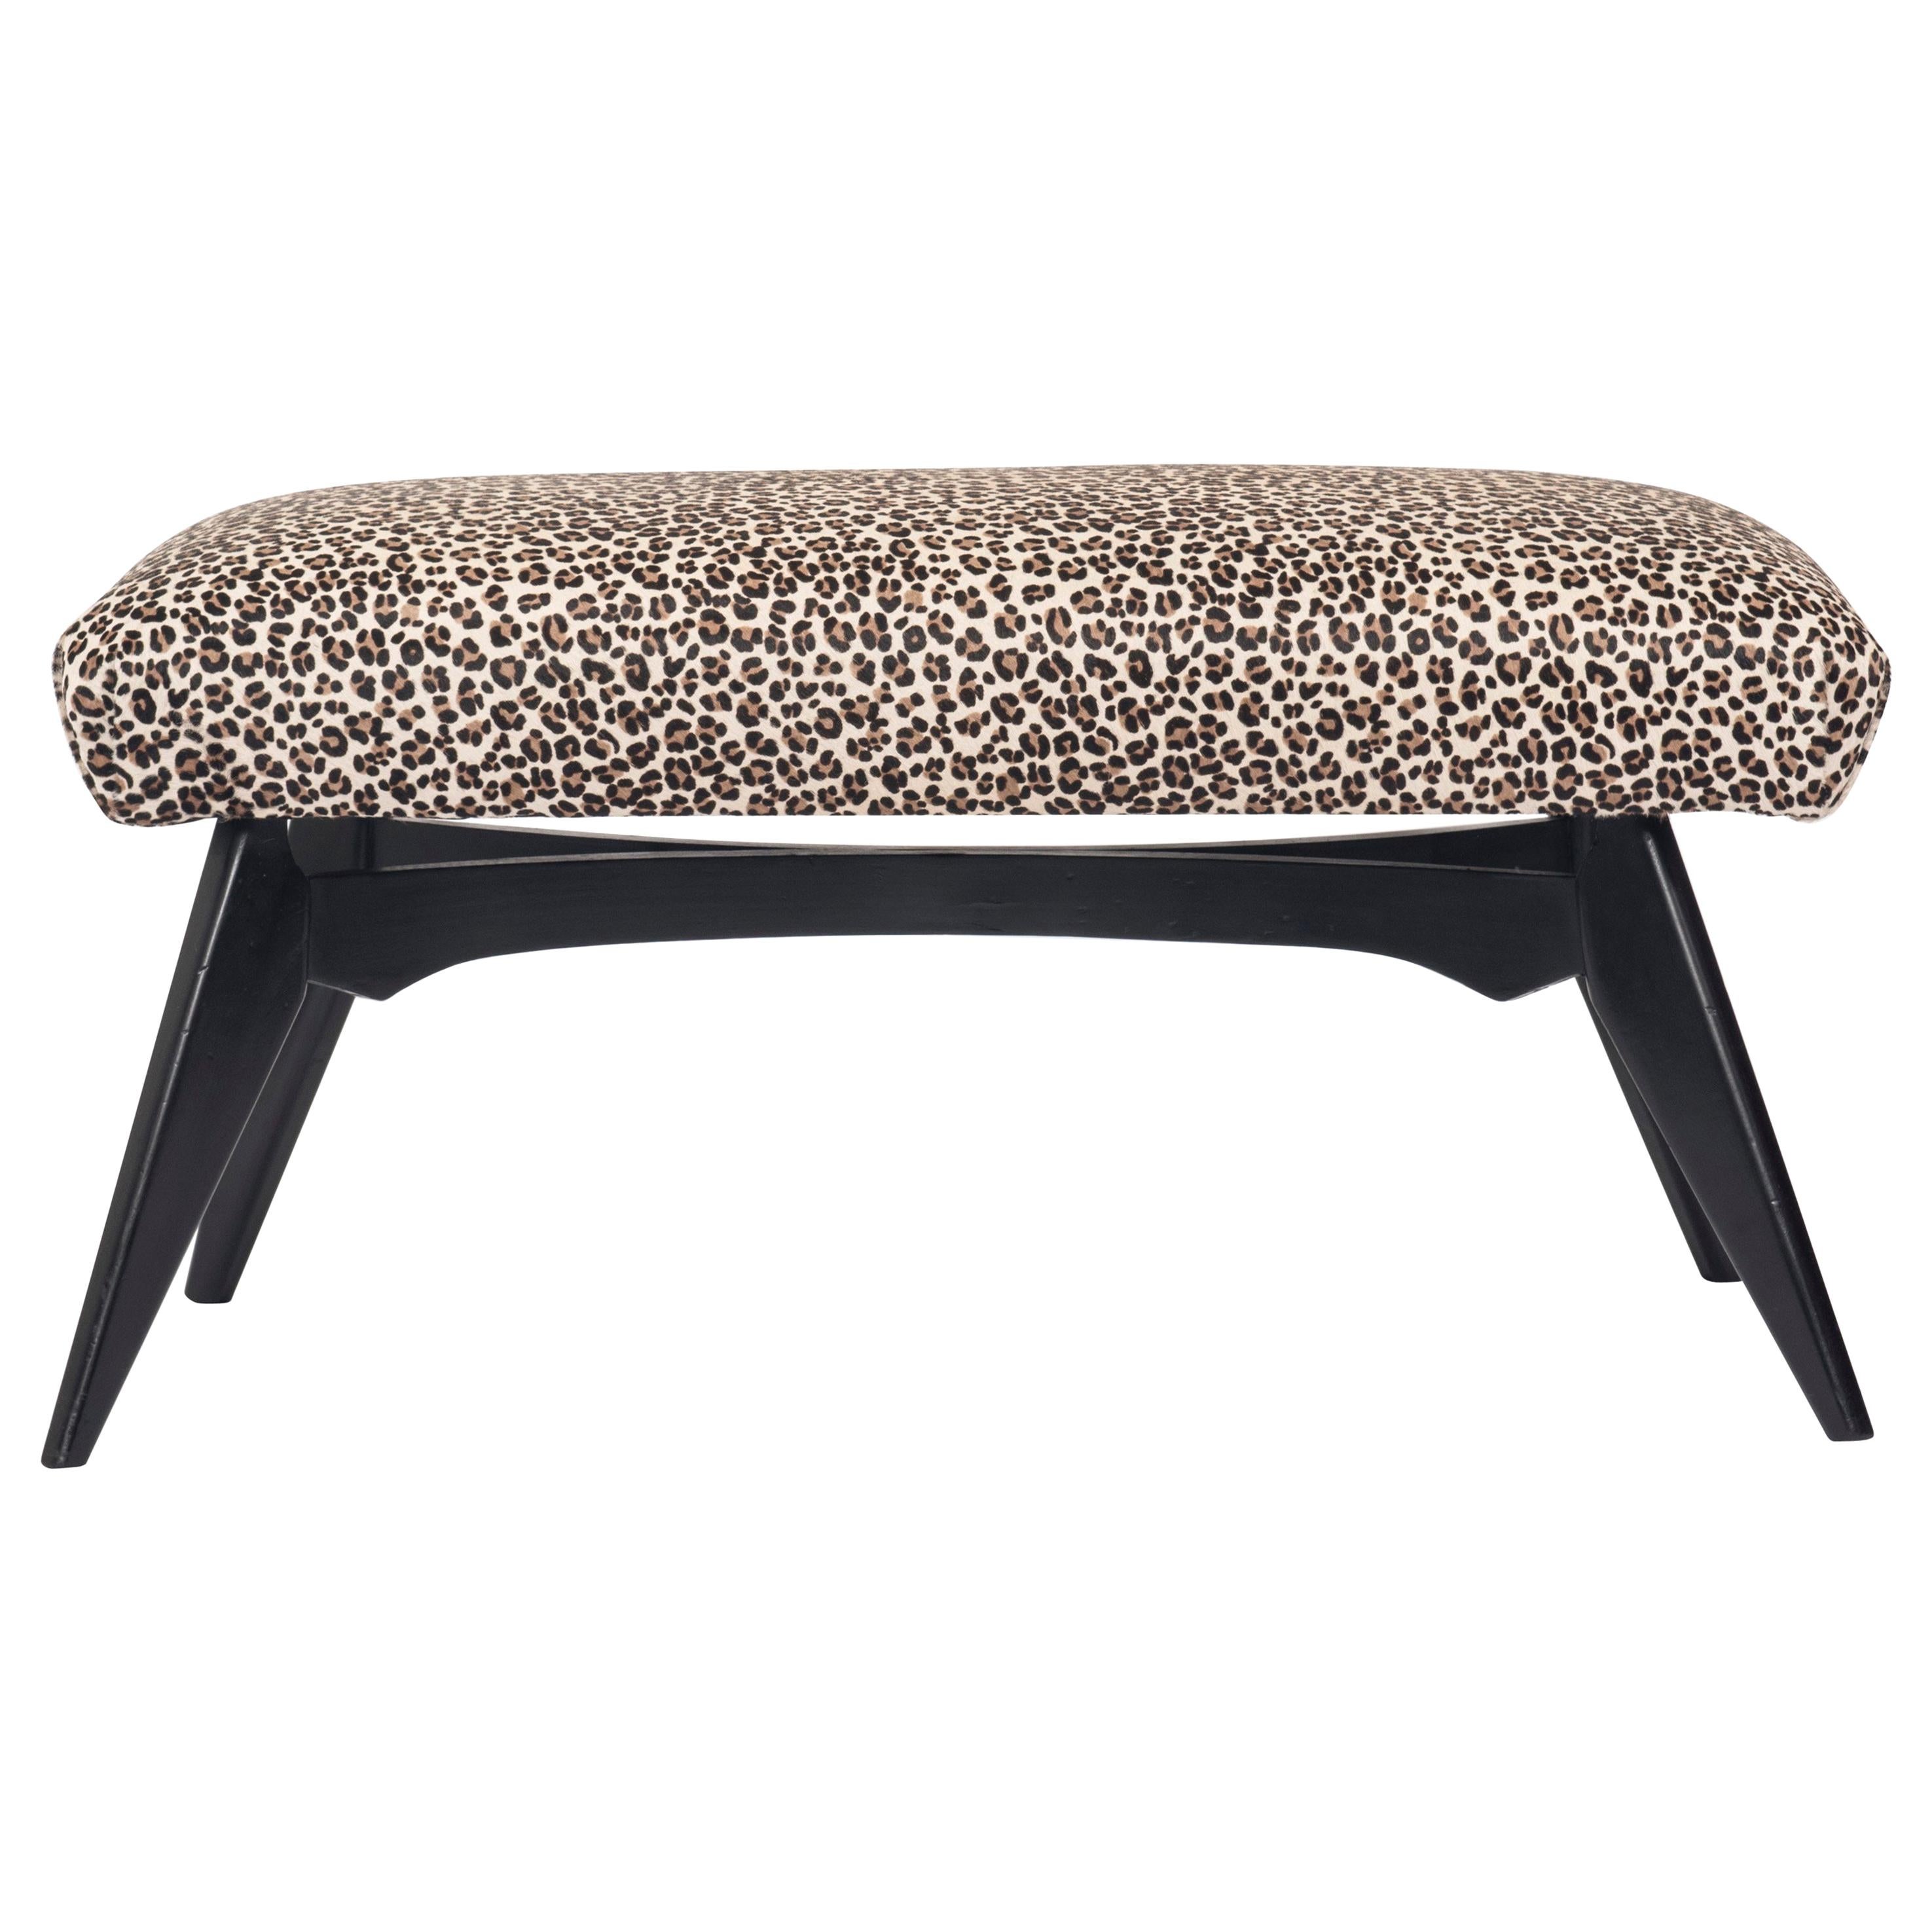 Italian Gio Ponti Inspired Bench Upholstered in Leopard Print Hair Hide